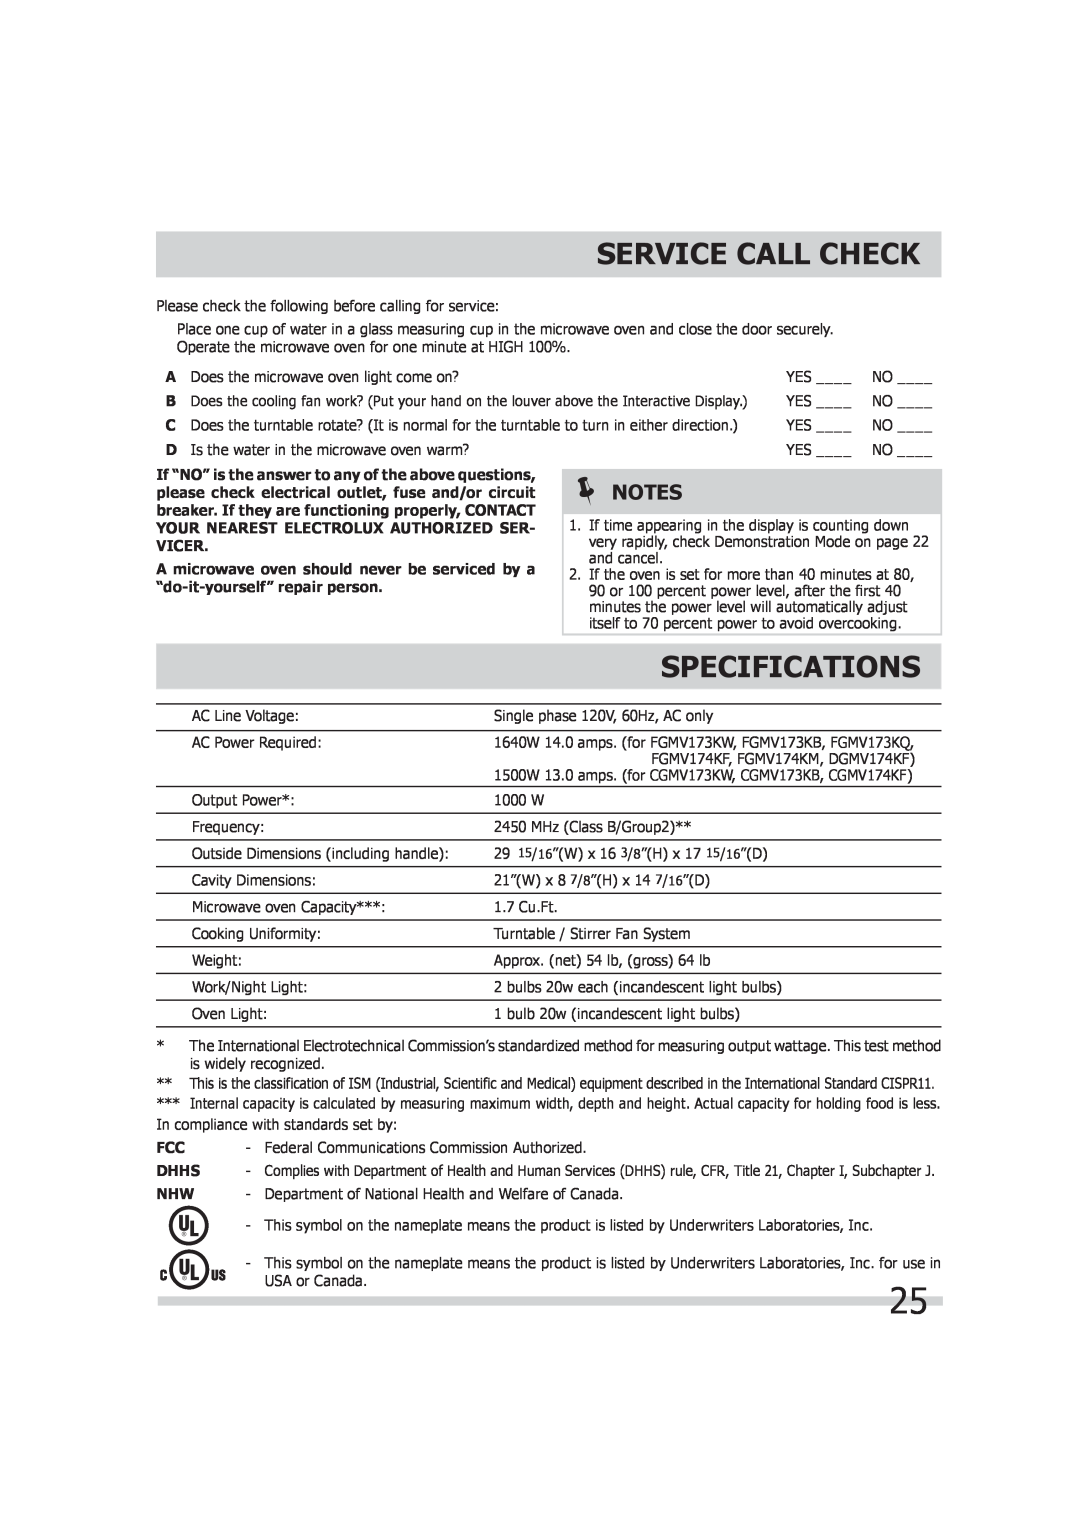 Frigidaire FGMV174KF Service Call Check, Specifications, If “NO” is the answer to any of the above questions, Vicer, Dhhs 